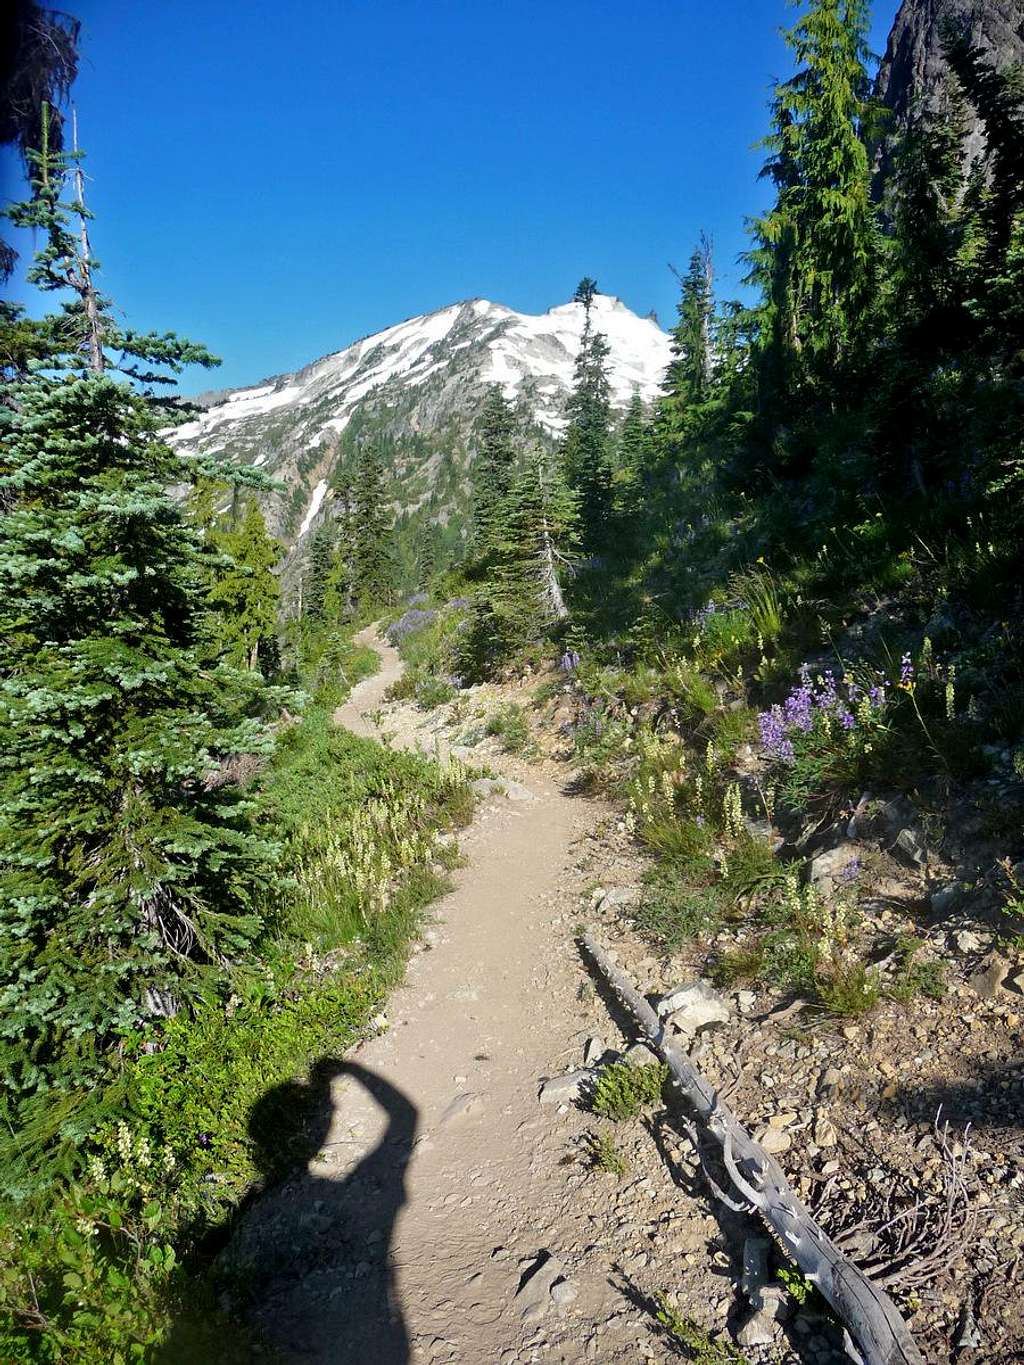 The Trail to Mount Daniel